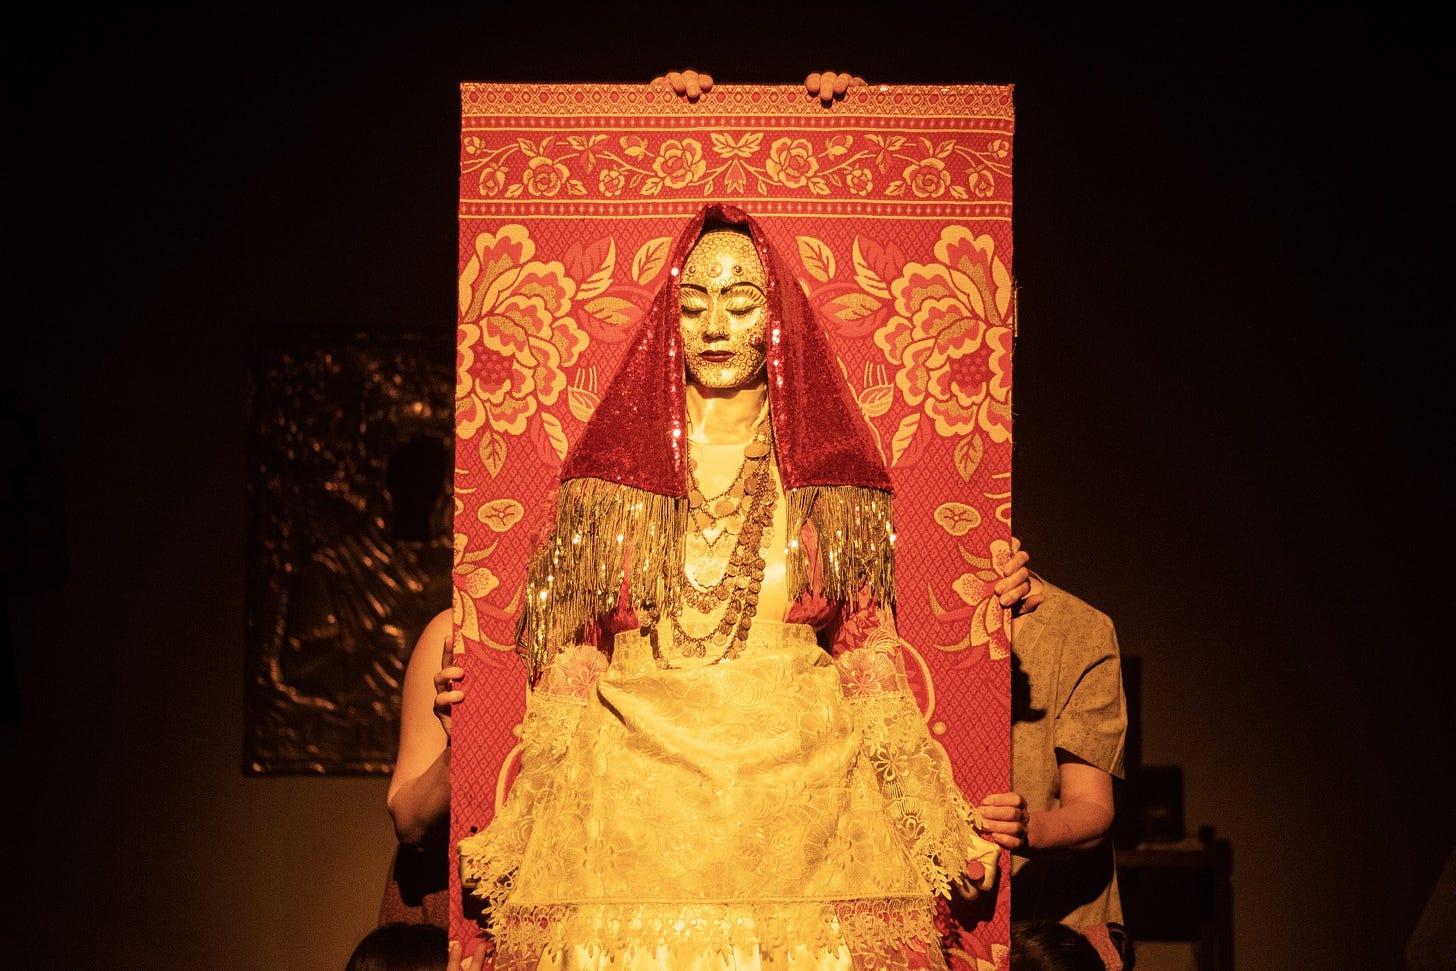 A woman in a gold mask wearing traditional Balkan dress and a red veil.